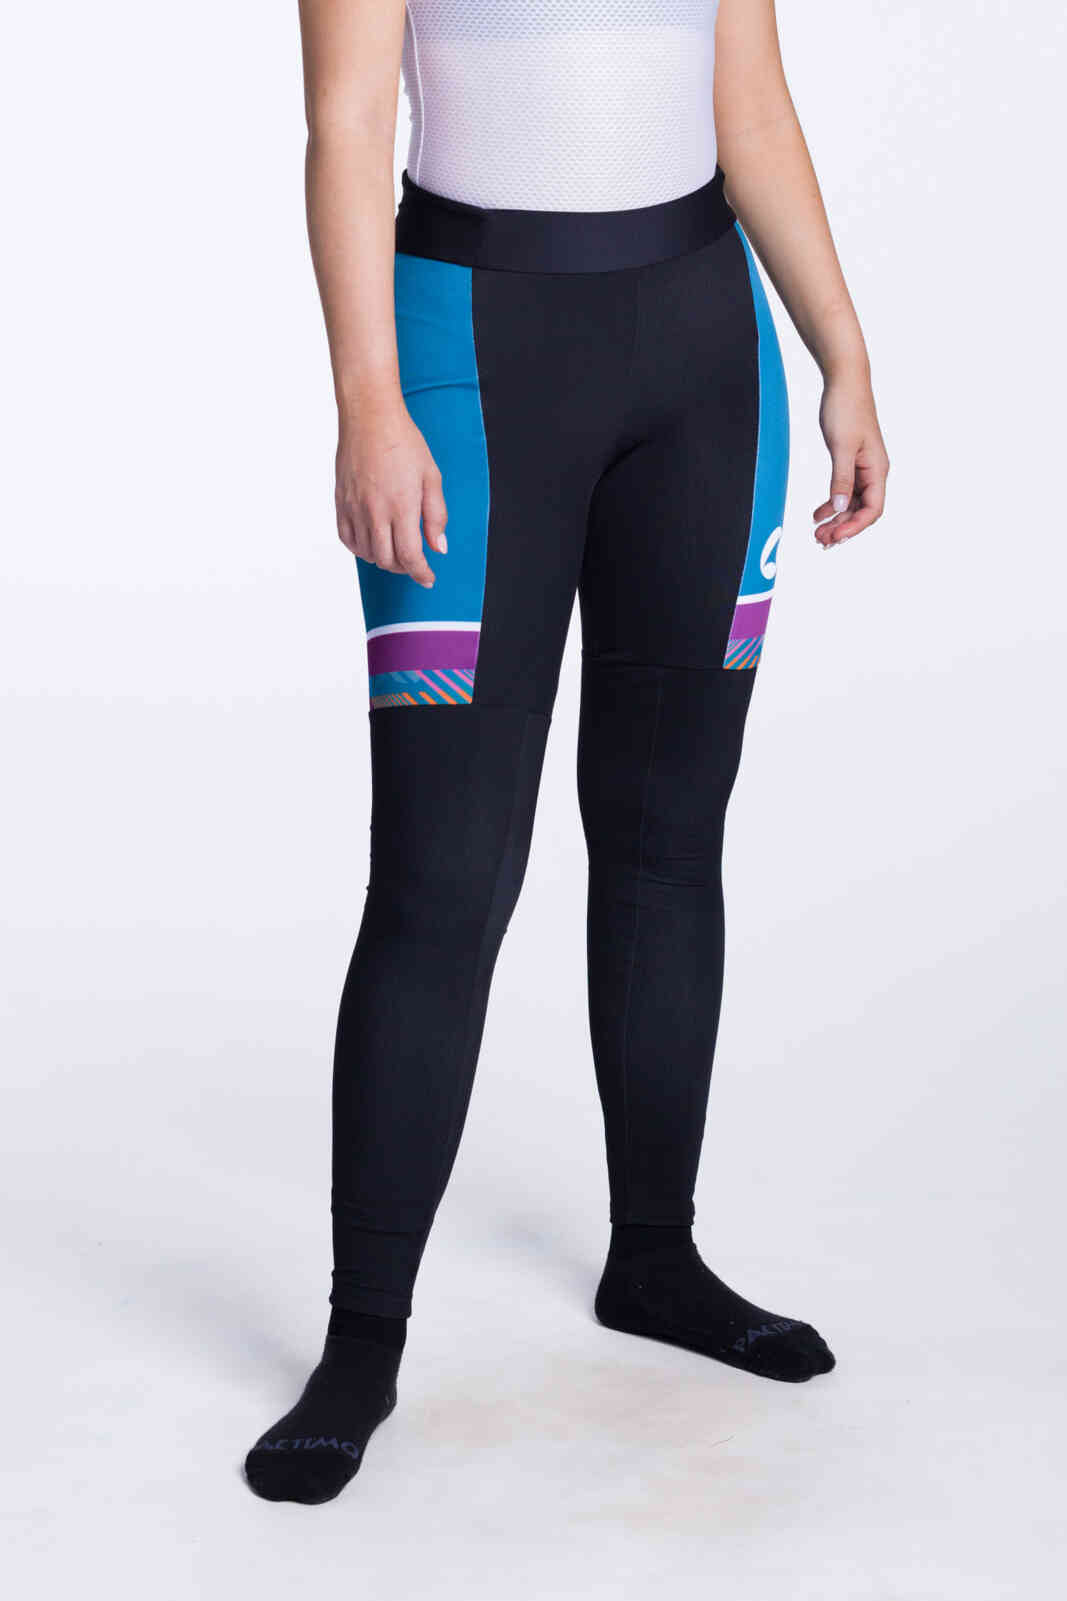 Women's Custom Thermal Cycling Tights, Alpine Pactimo